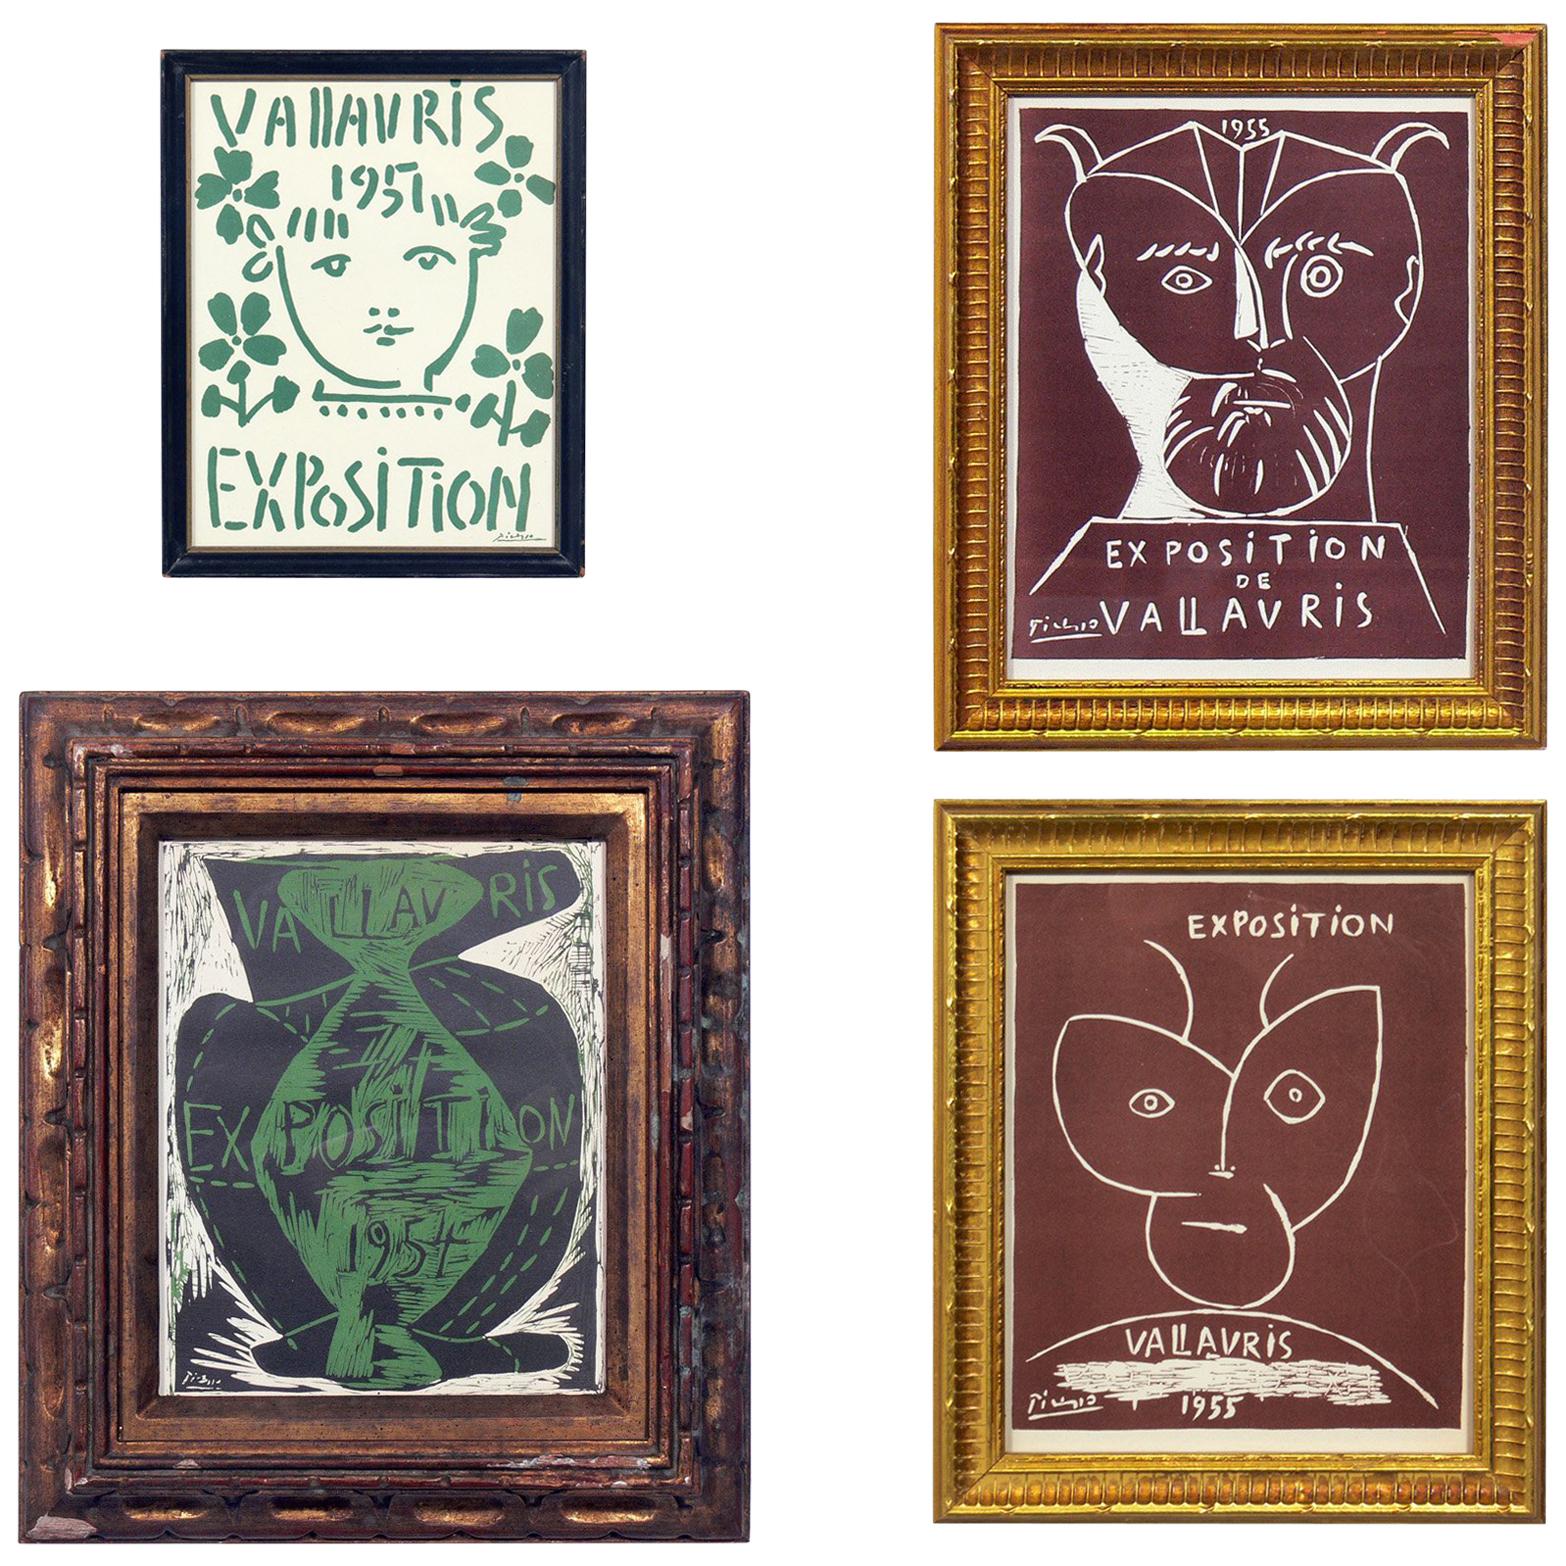 Selection of Picasso Prints